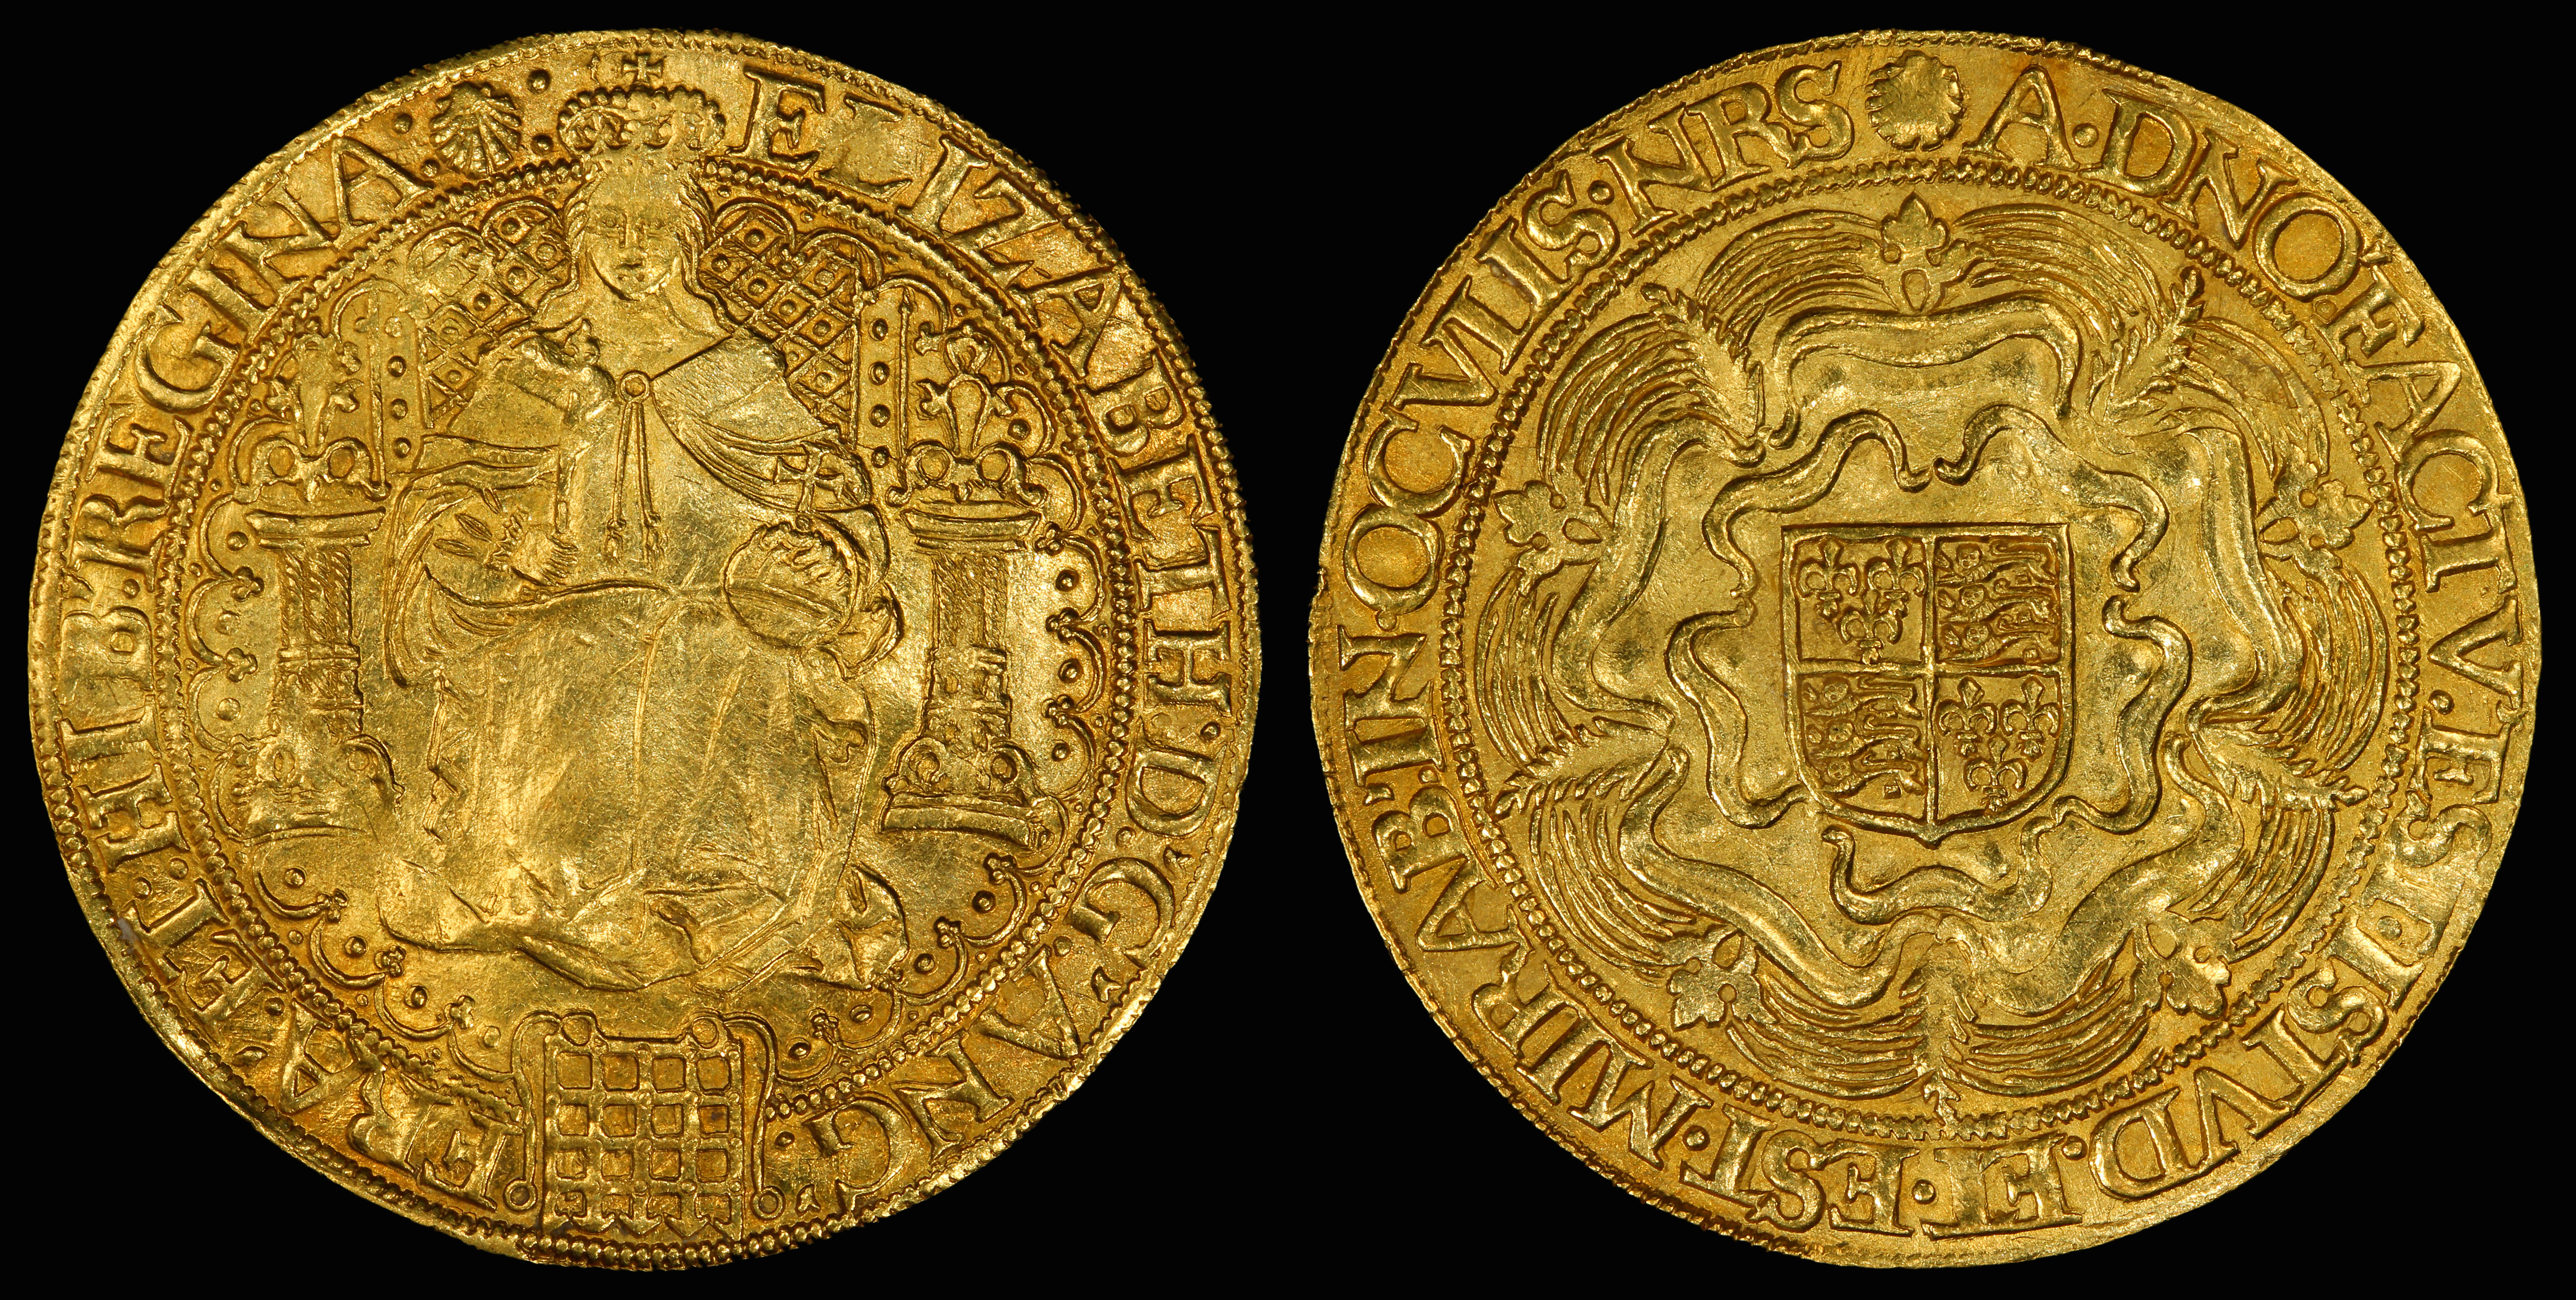 Photo of England (Great Britain) Sovereign of Elizabeth I | For illustration purposes. | Source: Wikimedia Commons/National Museum of American History/Public Domain